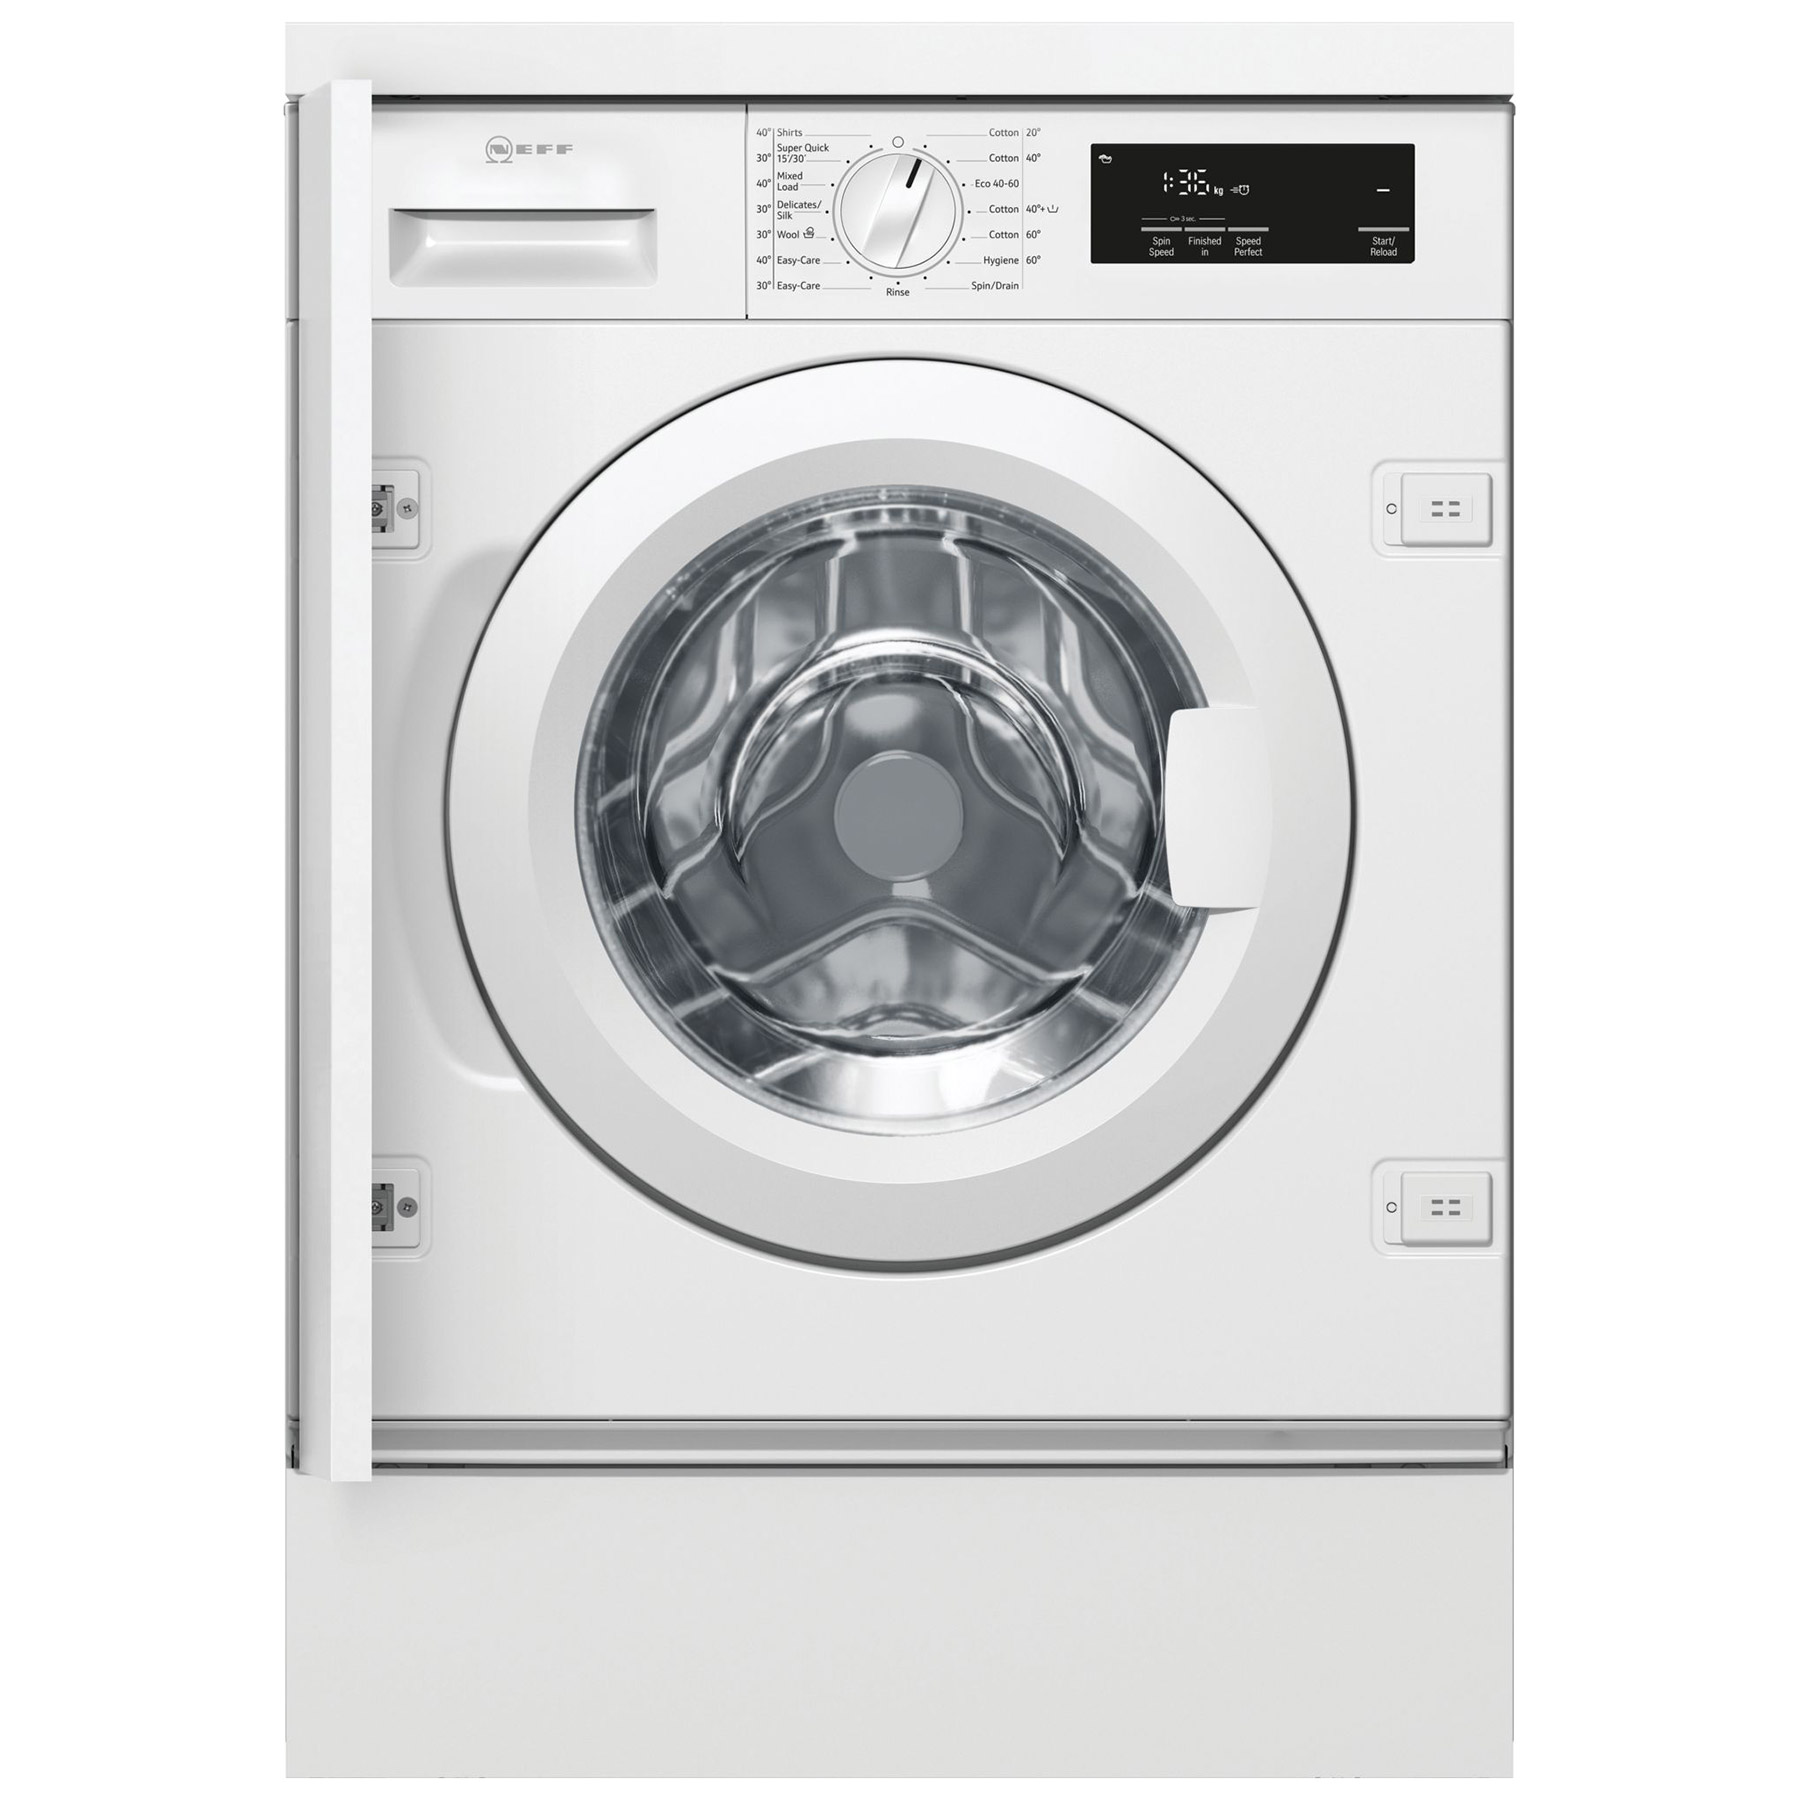 Image of Neff W543BX2GB Integrated Washing Machine 1400rpm 8kg C Rated